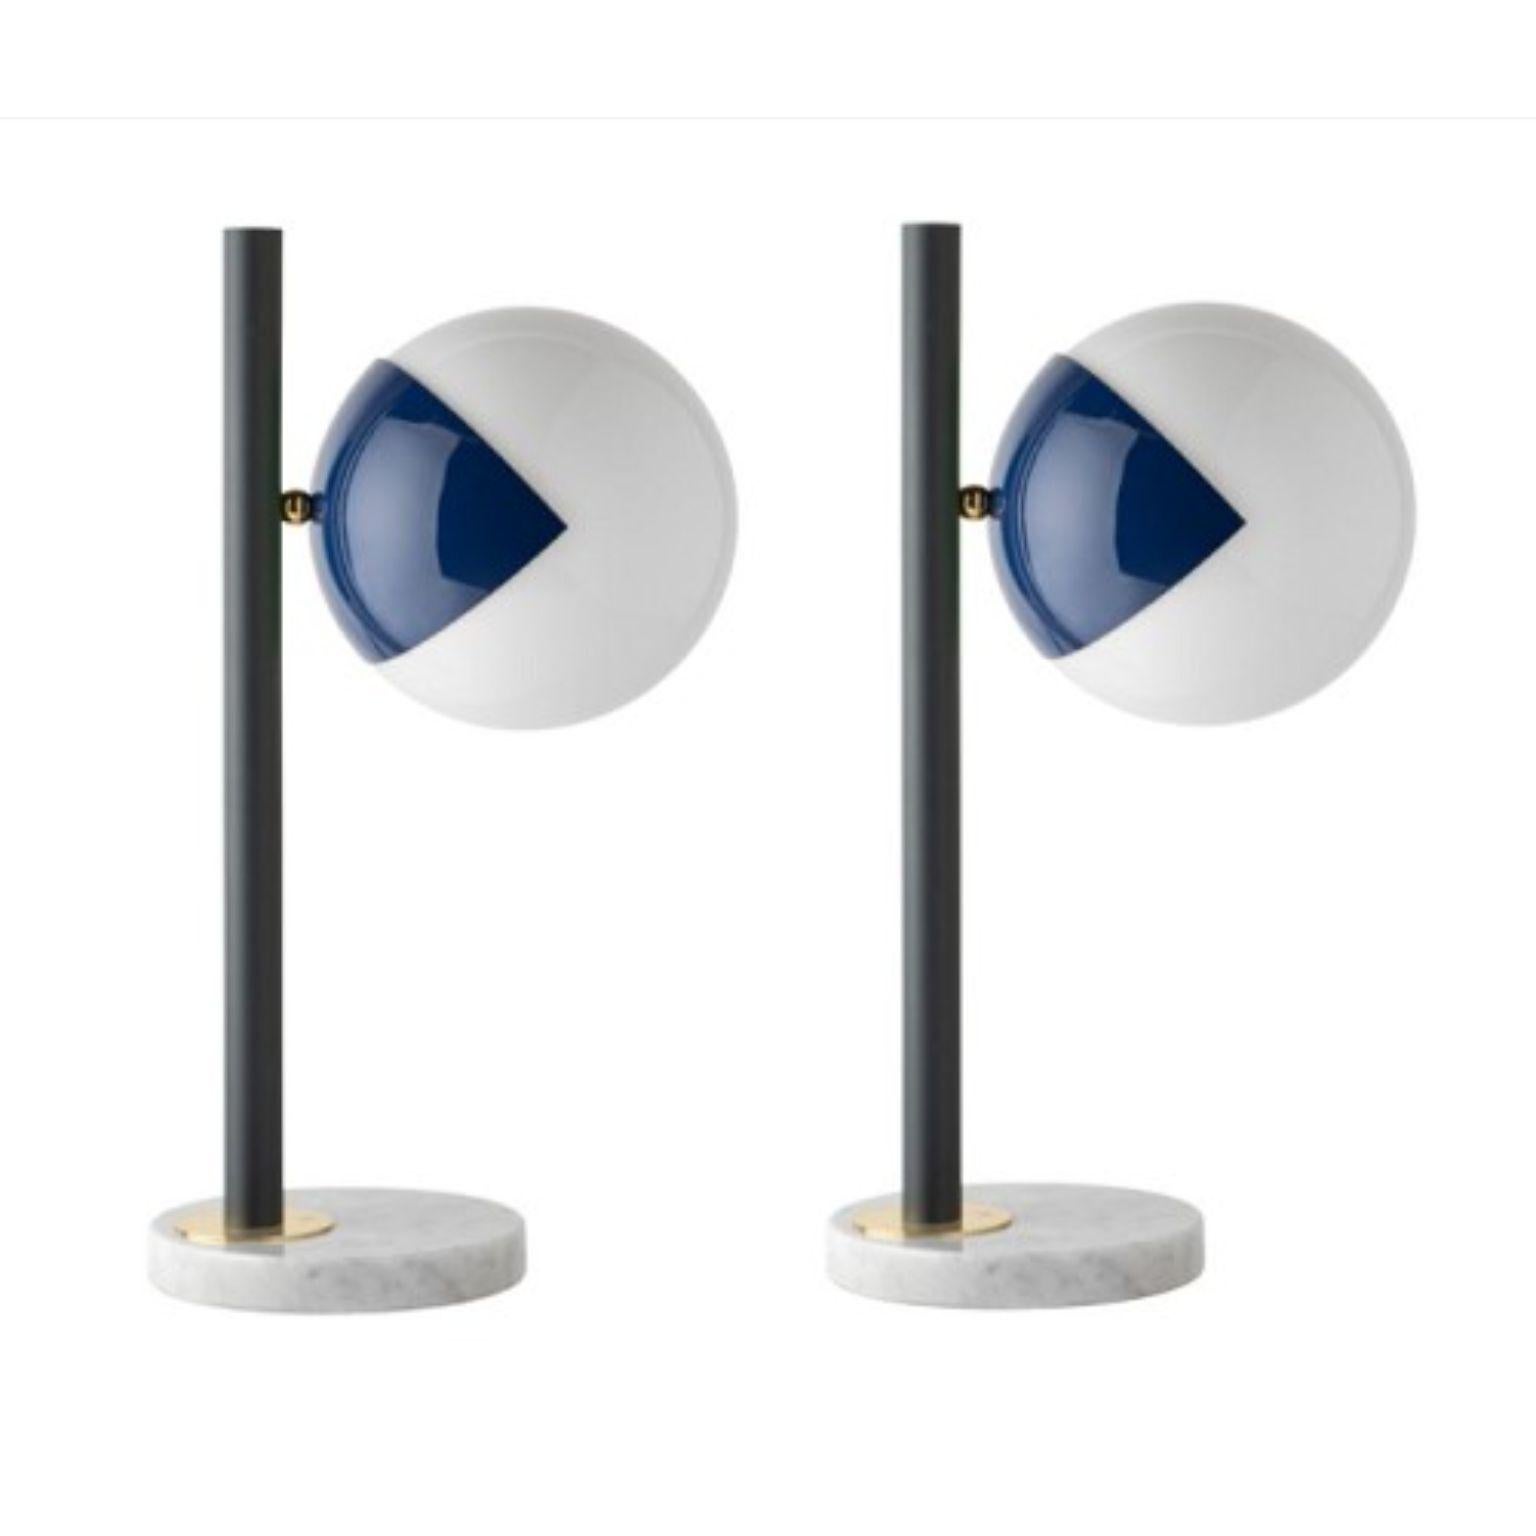 Blue dimmable table lamp pop-up black by Magic Circus Editions.
Dimensions: Ø 22 x 30 x 53 cm .
Materials: carrara marble base, smooth brass tube, glossy mouth blown glass.

All our lamps can be wired according to each country. If sold to the